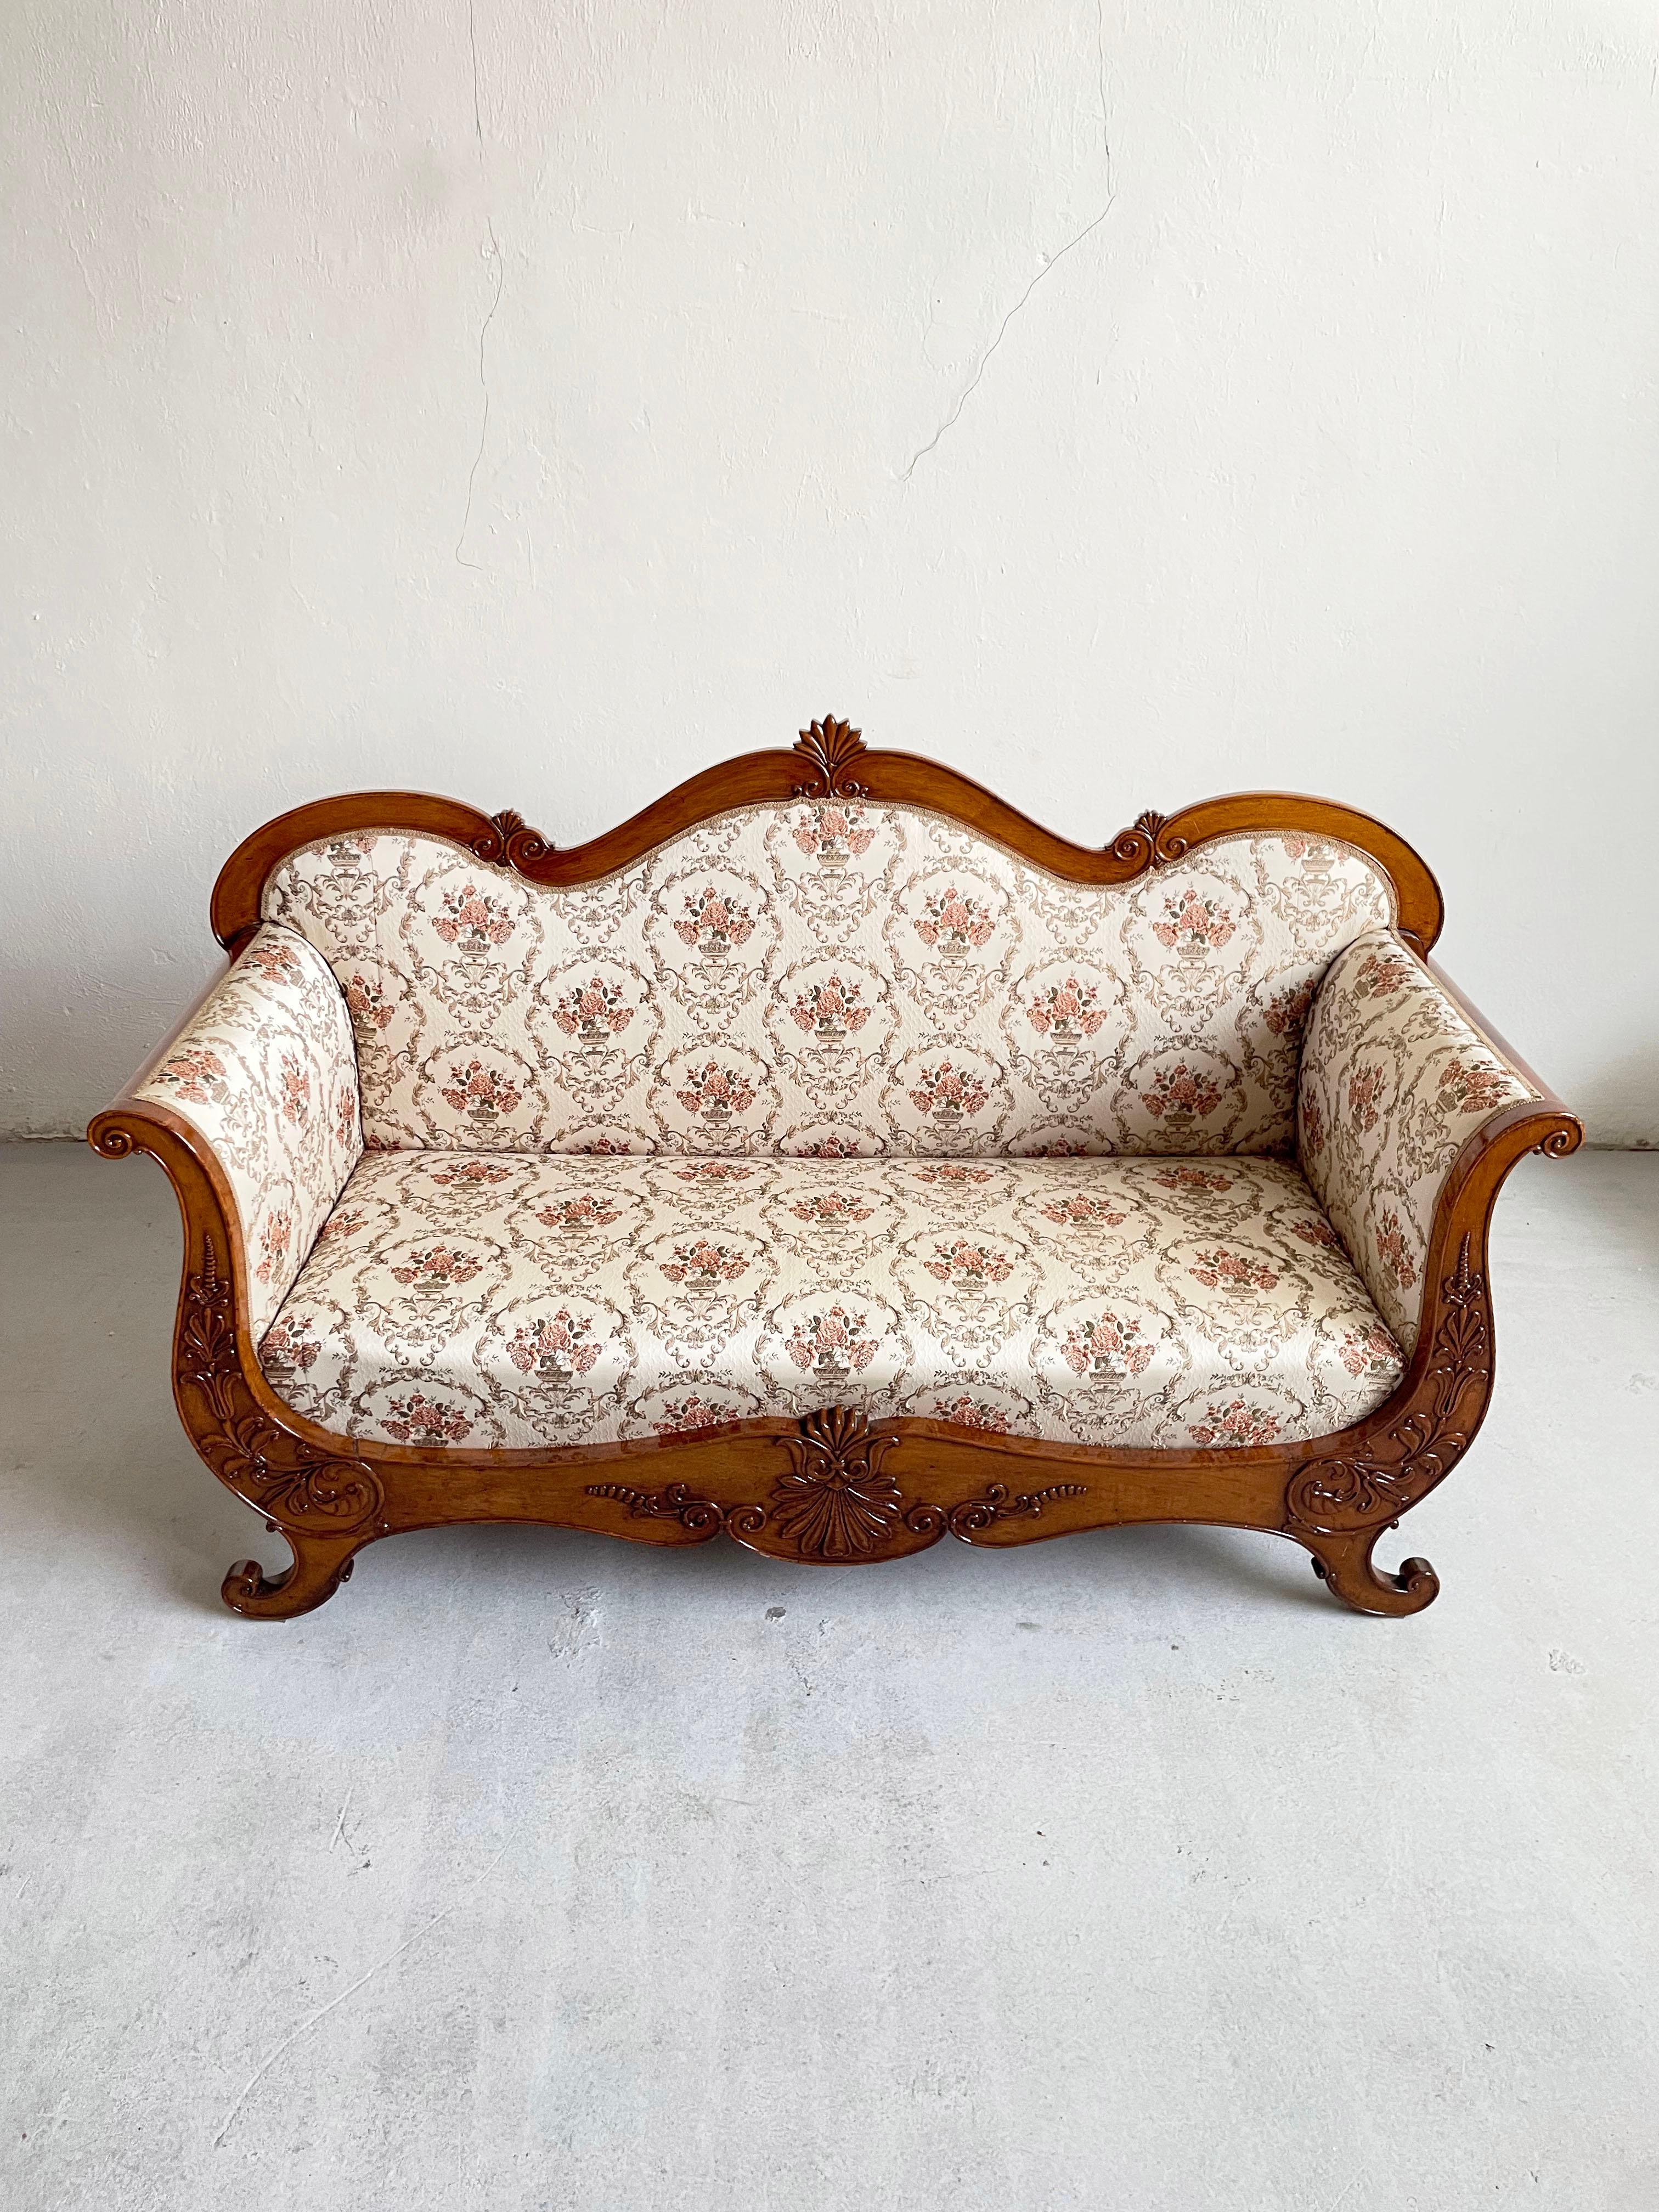 Antique 19th Century Upholstered Sofa King Louis Philippe, Northern Italy For Sale 2